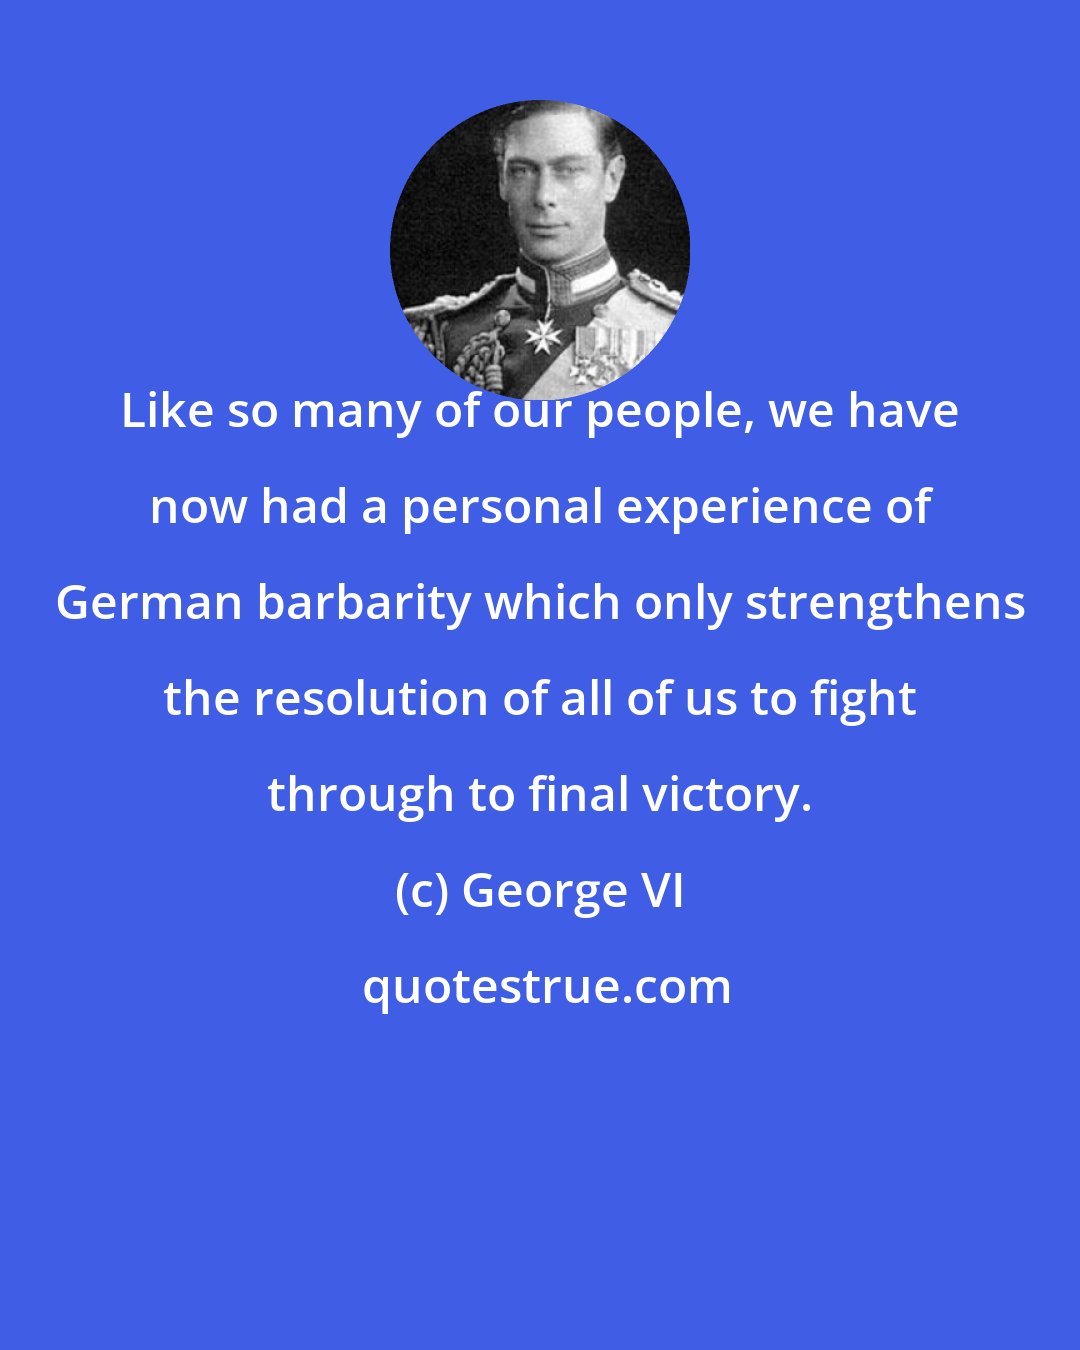 George VI: Like so many of our people, we have now had a personal experience of German barbarity which only strengthens the resolution of all of us to fight through to final victory.